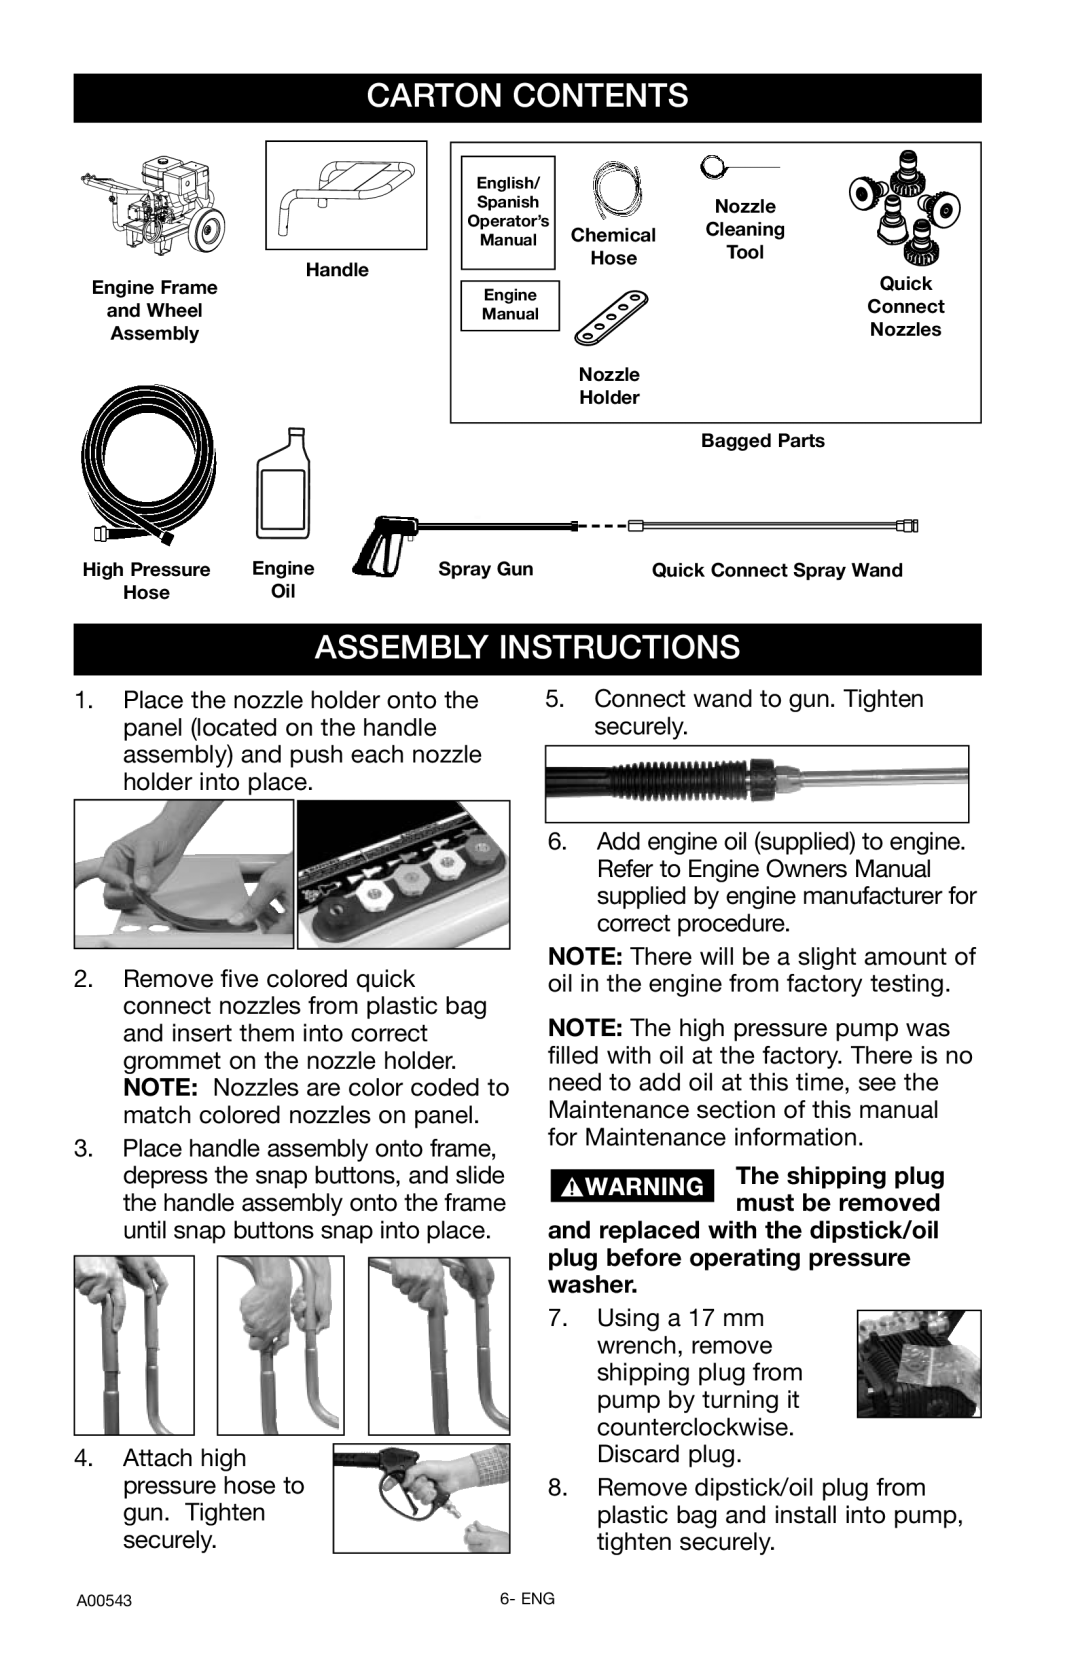 Delta A00543, DTH3635 instruction manual Carton Contents, Assembly Instructions, plug before operating pressure washer 